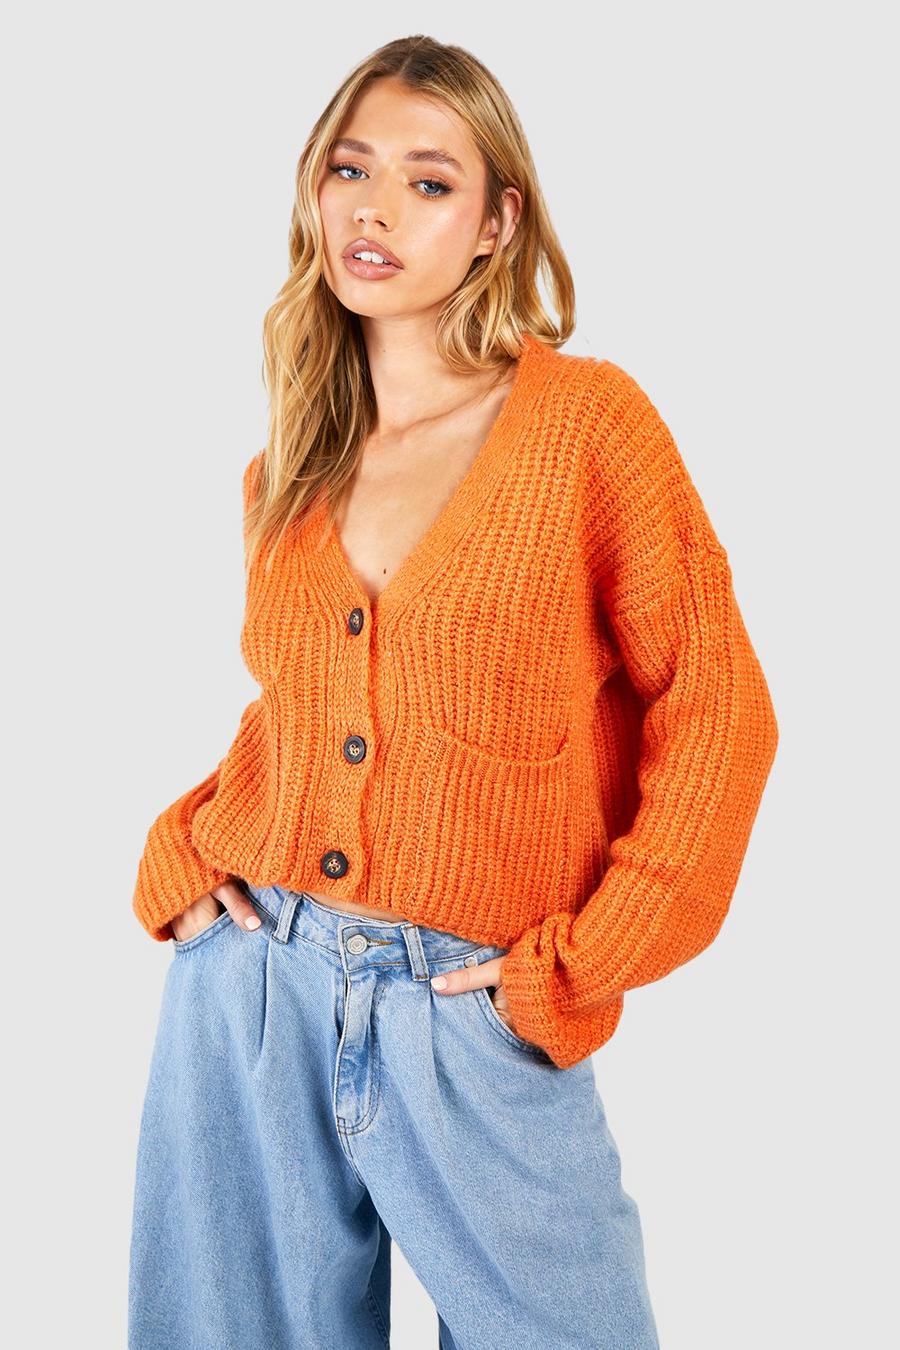 Orange 3 Button Slouchy Cardigan With Pockets